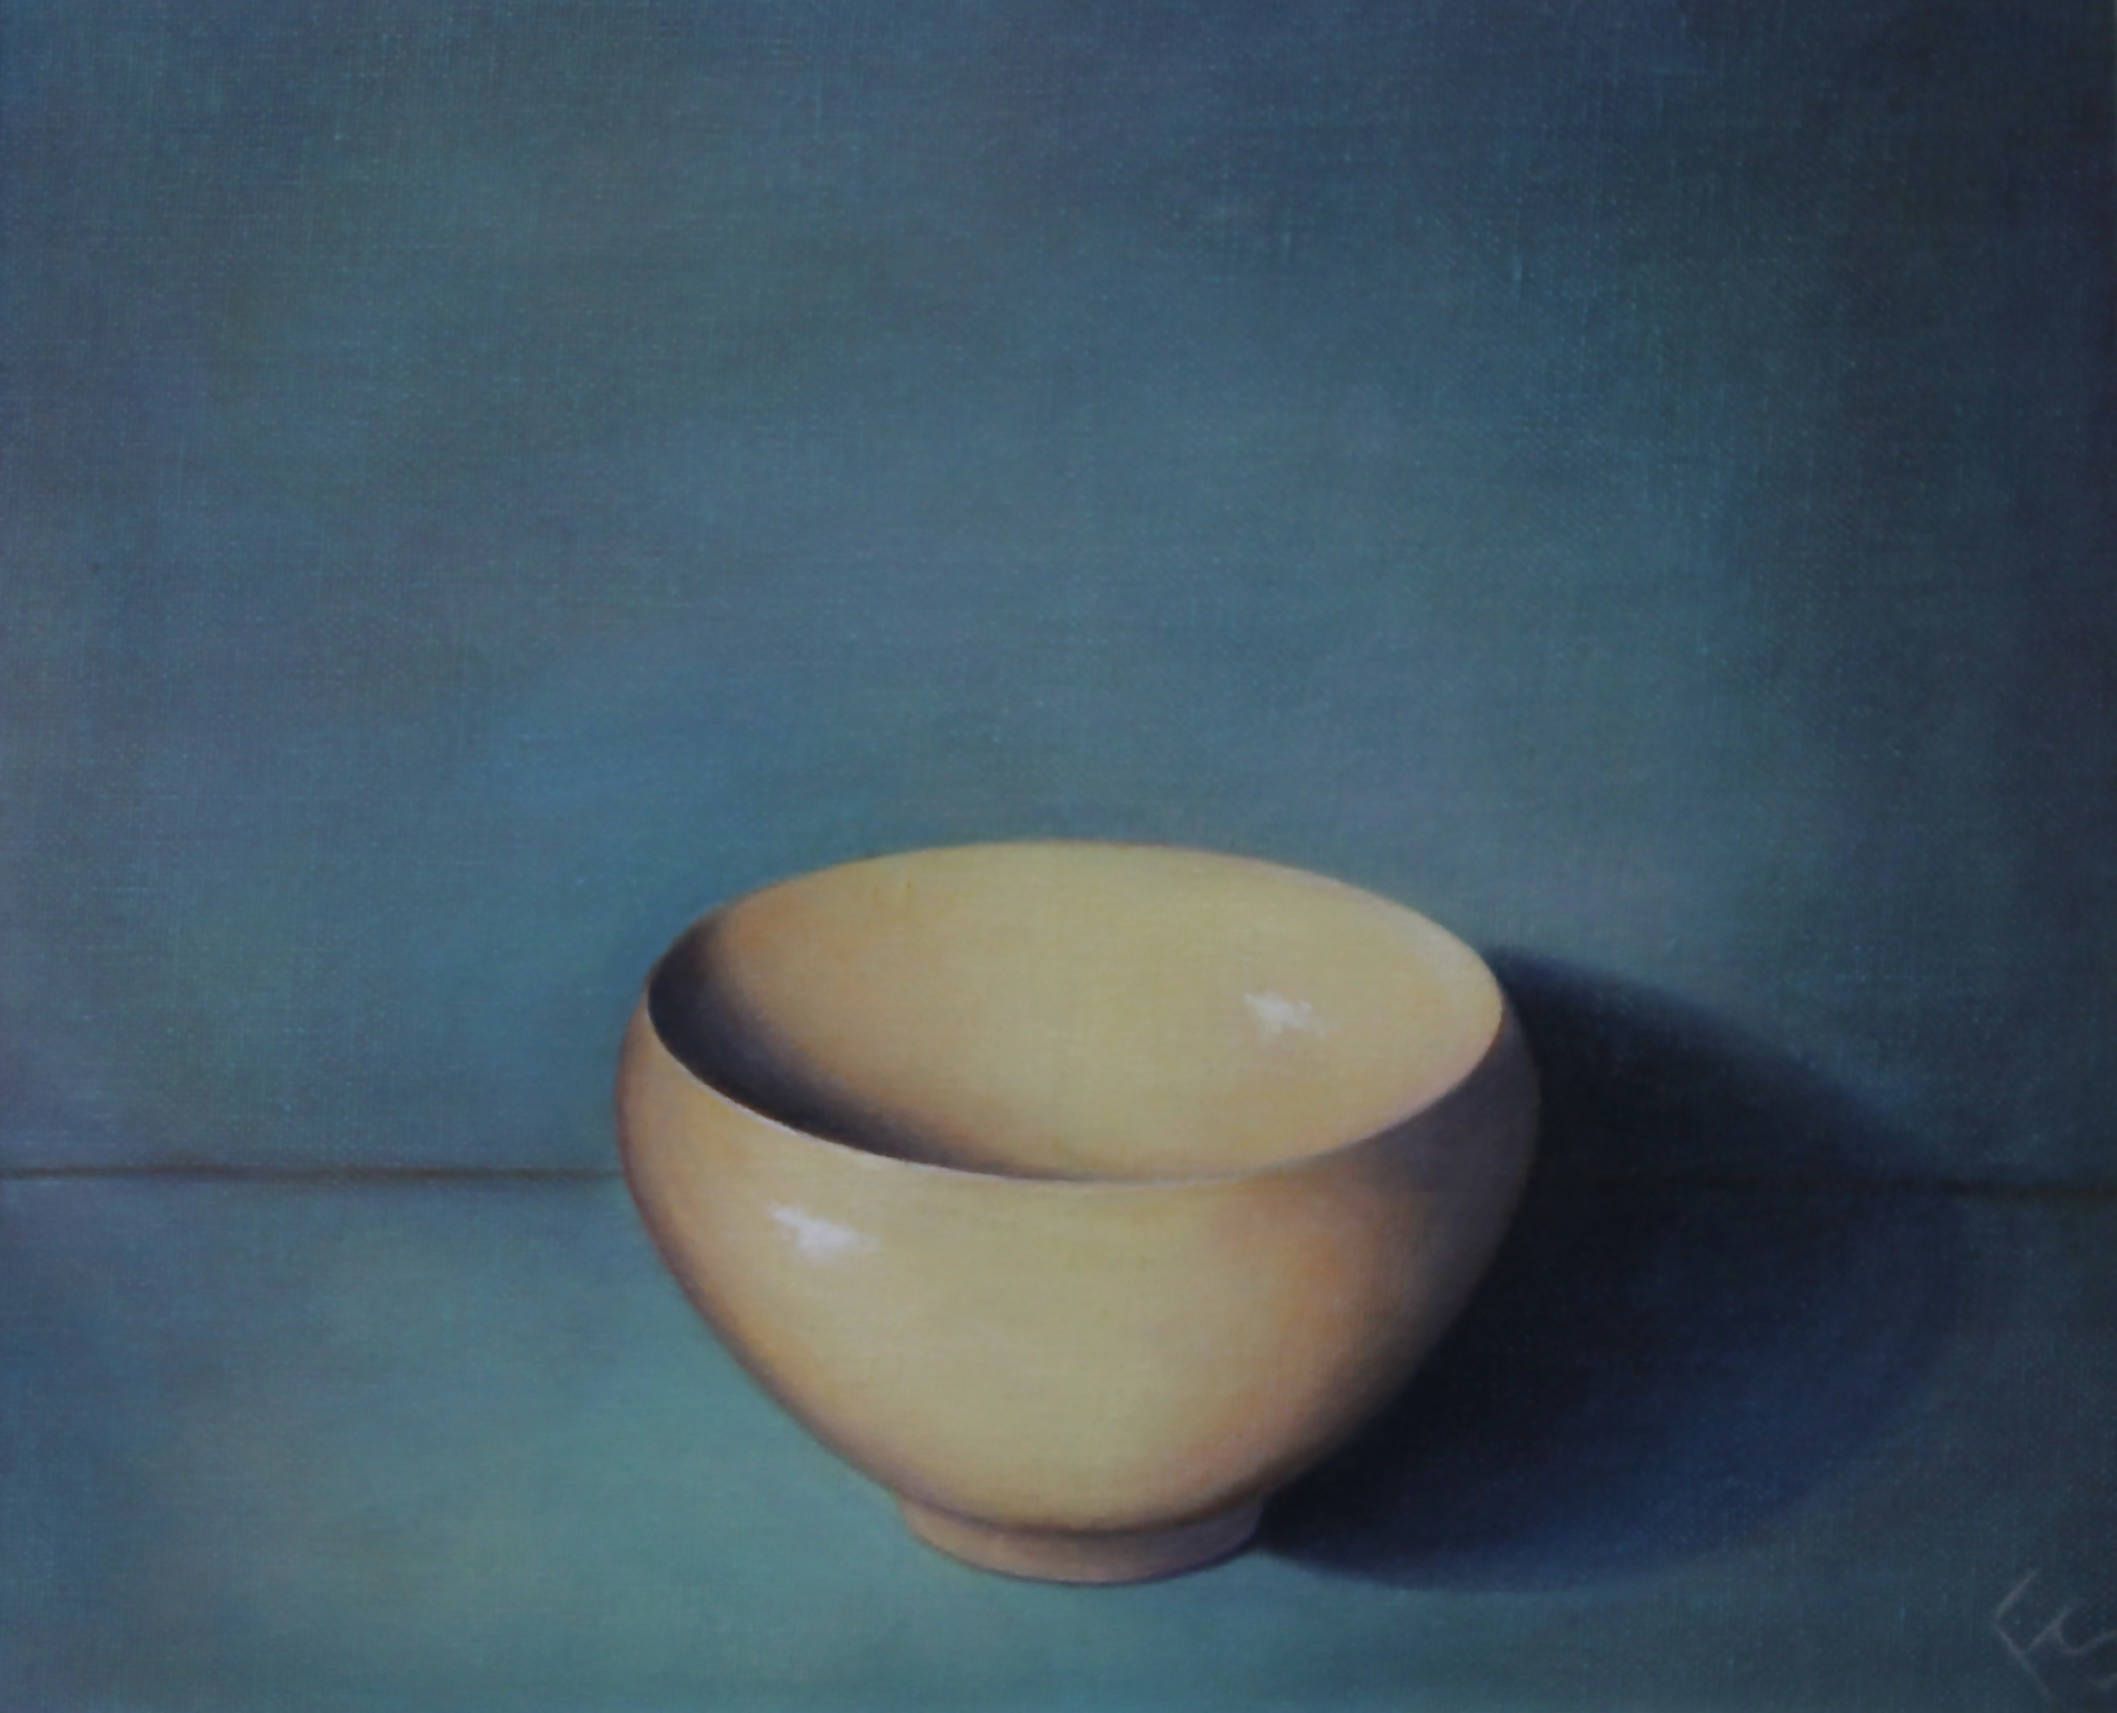 Offering Bowl 1 by Fiona Smith